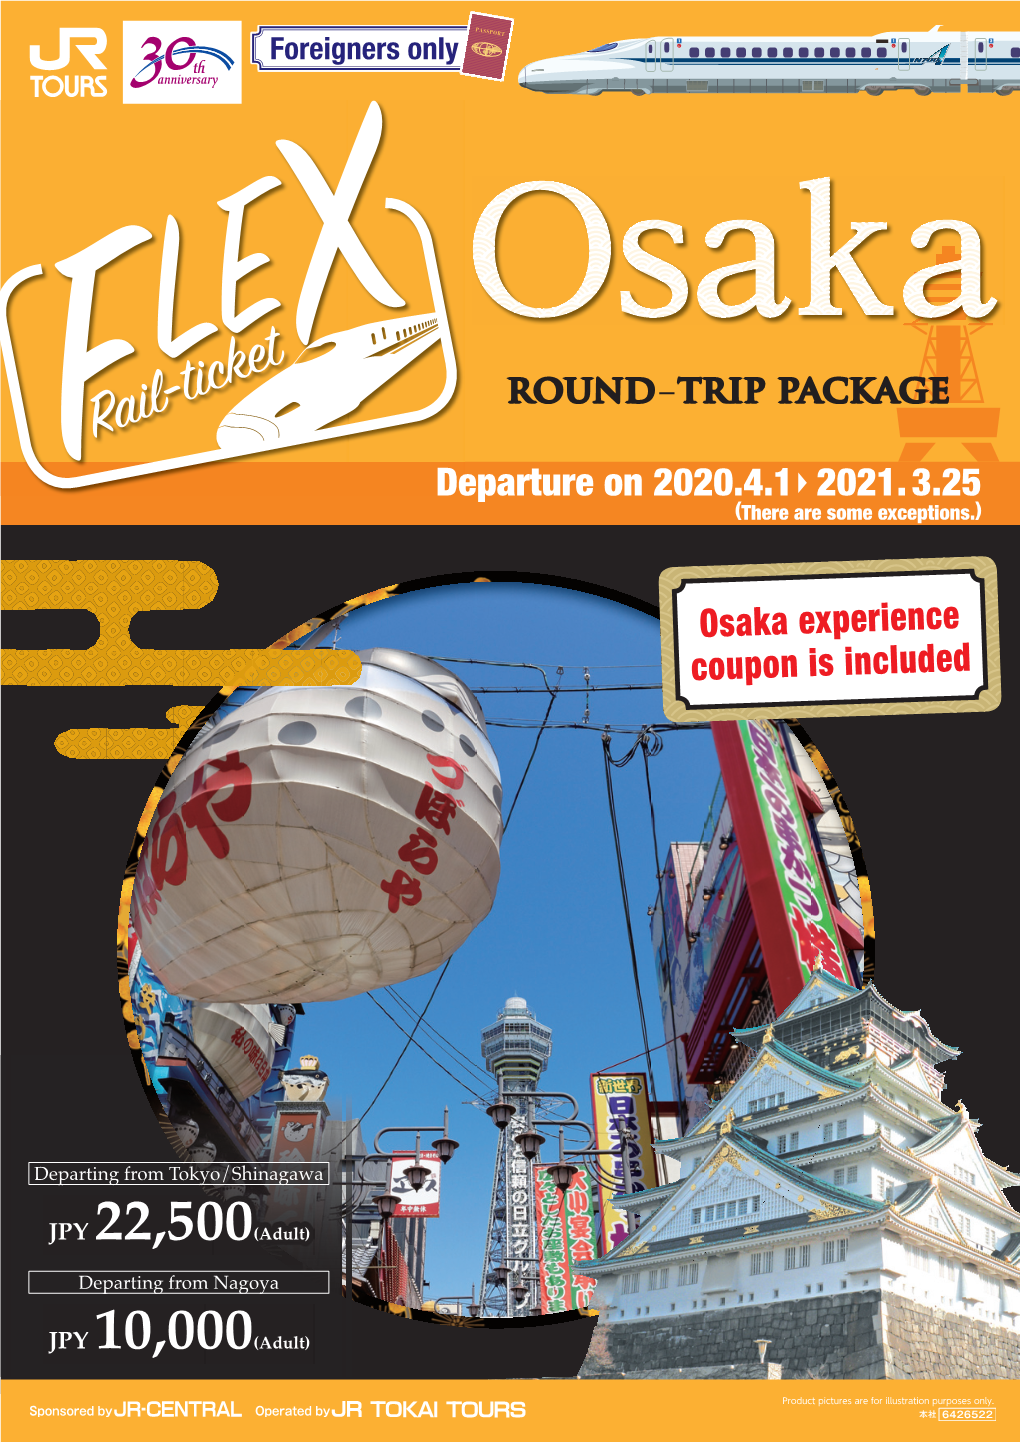 Osaka Experience Coupon Is Included